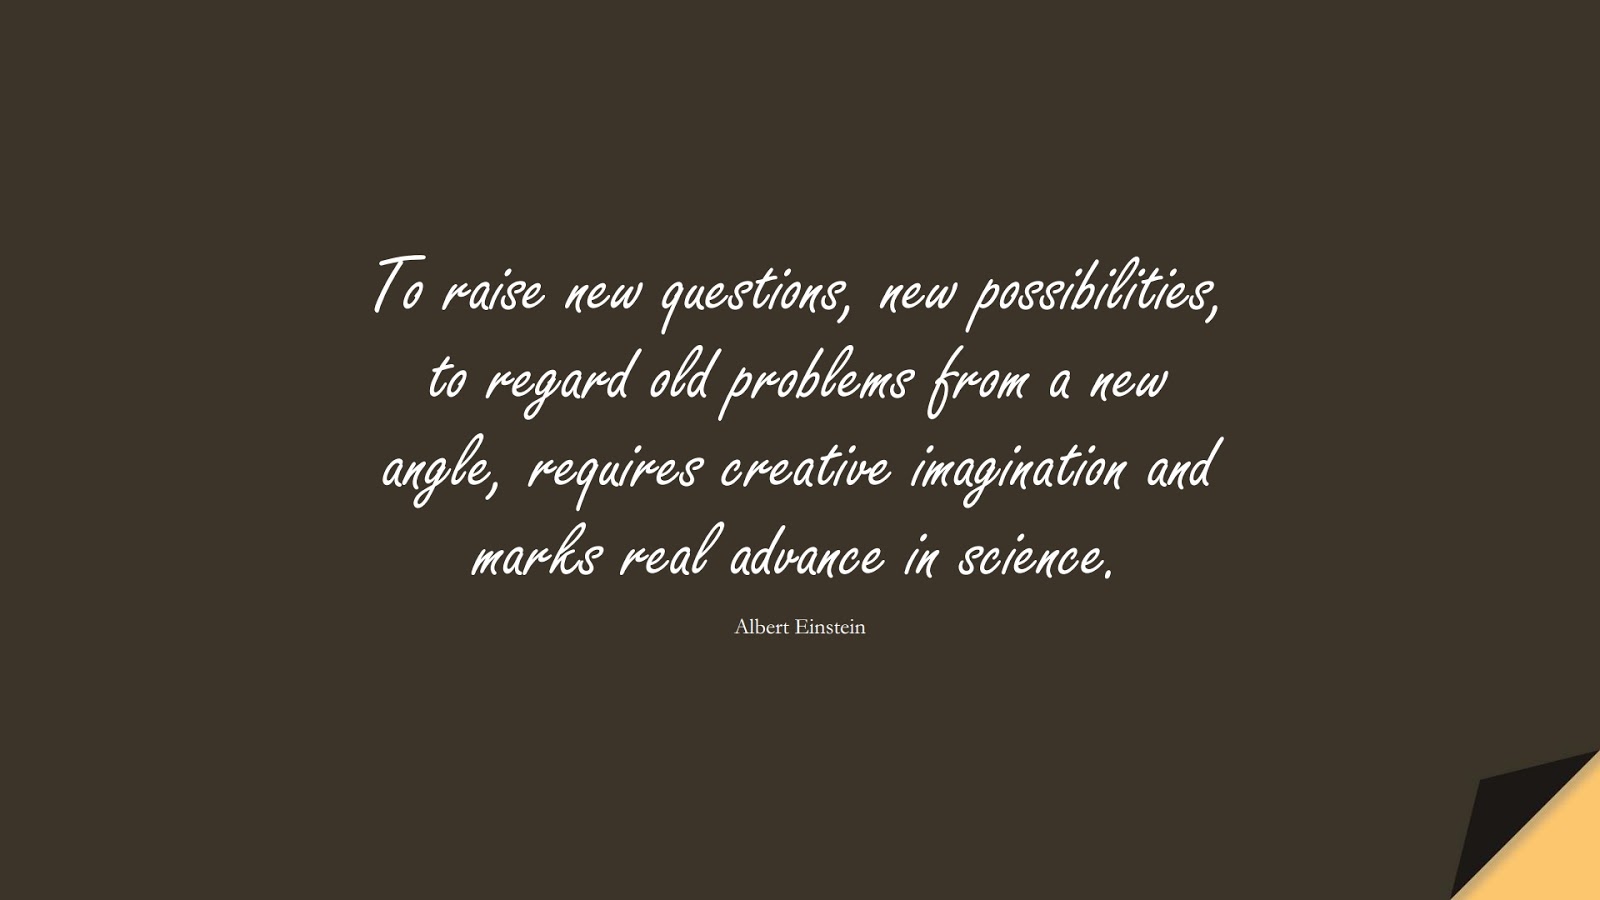 To raise new questions, new possibilities, to regard old problems from a new angle, requires creative imagination and marks real advance in science. (Albert Einstein);  #AlbertEnsteinQuotes